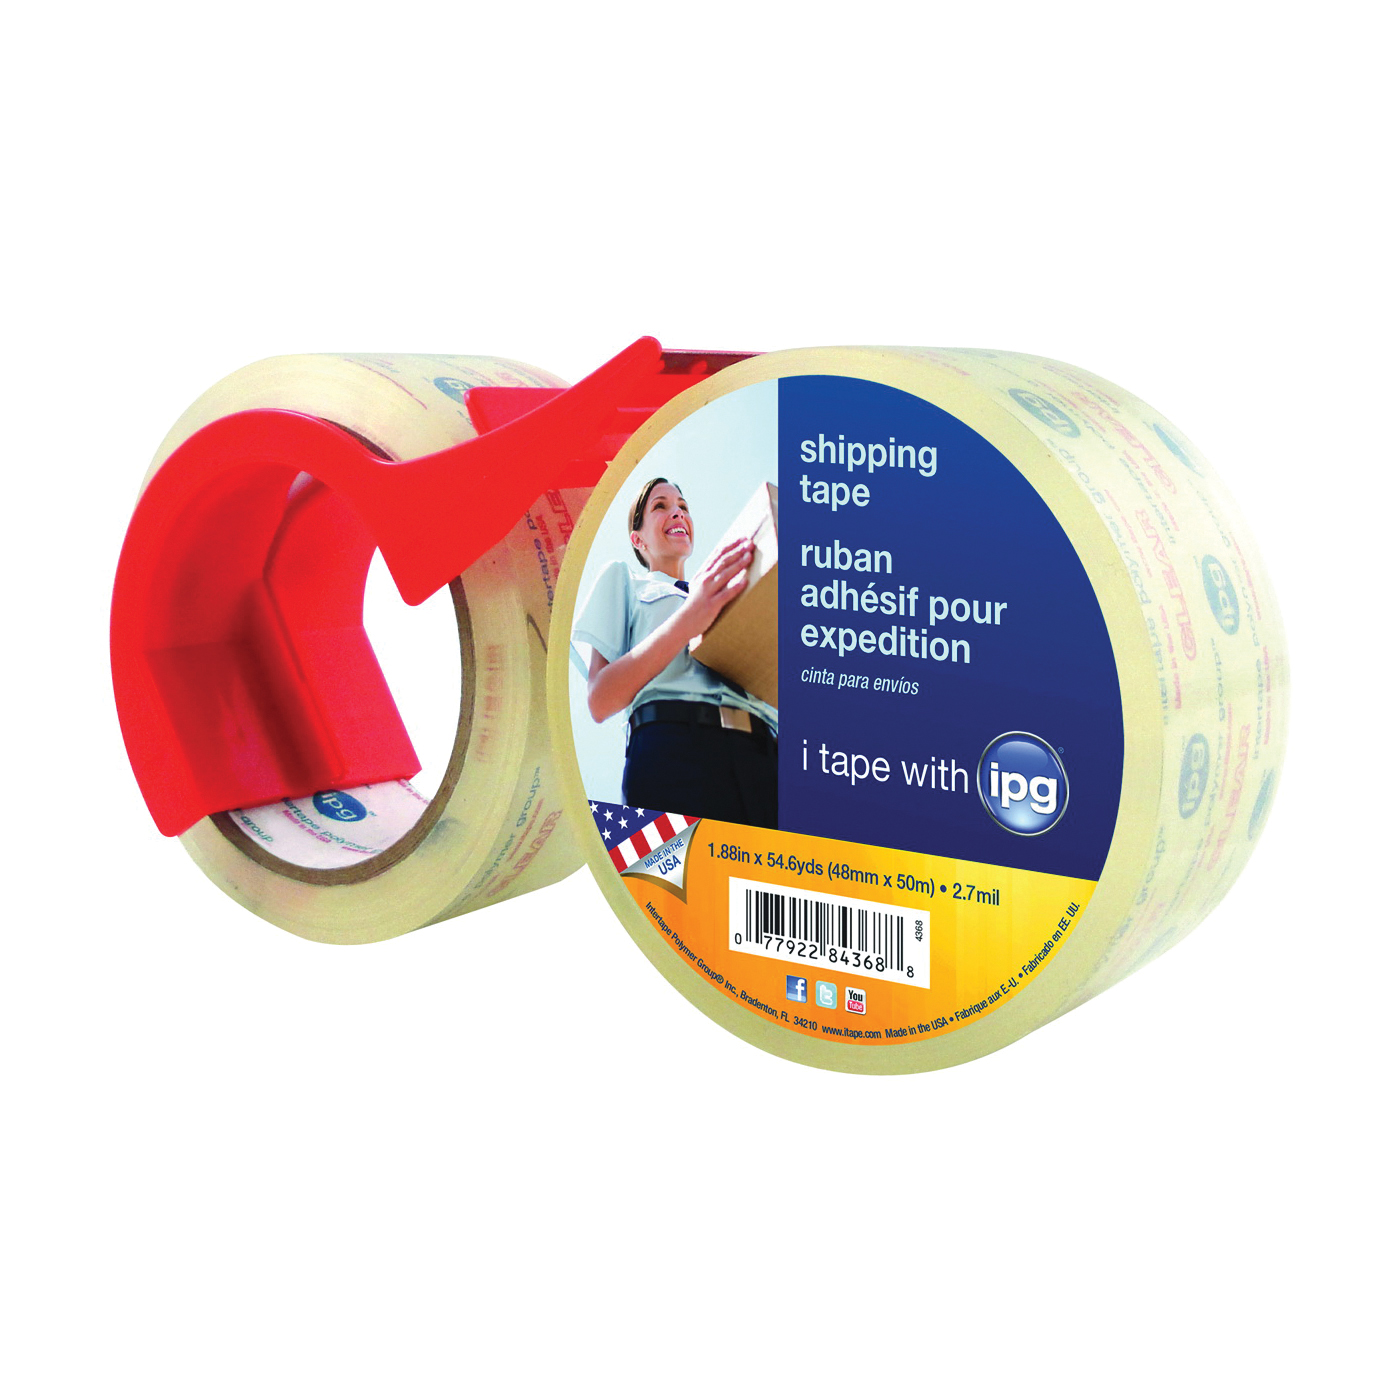 4368 Shipping Tape, 54.6 yd L, 1.88 in W, Polypropylene Backing, Clear